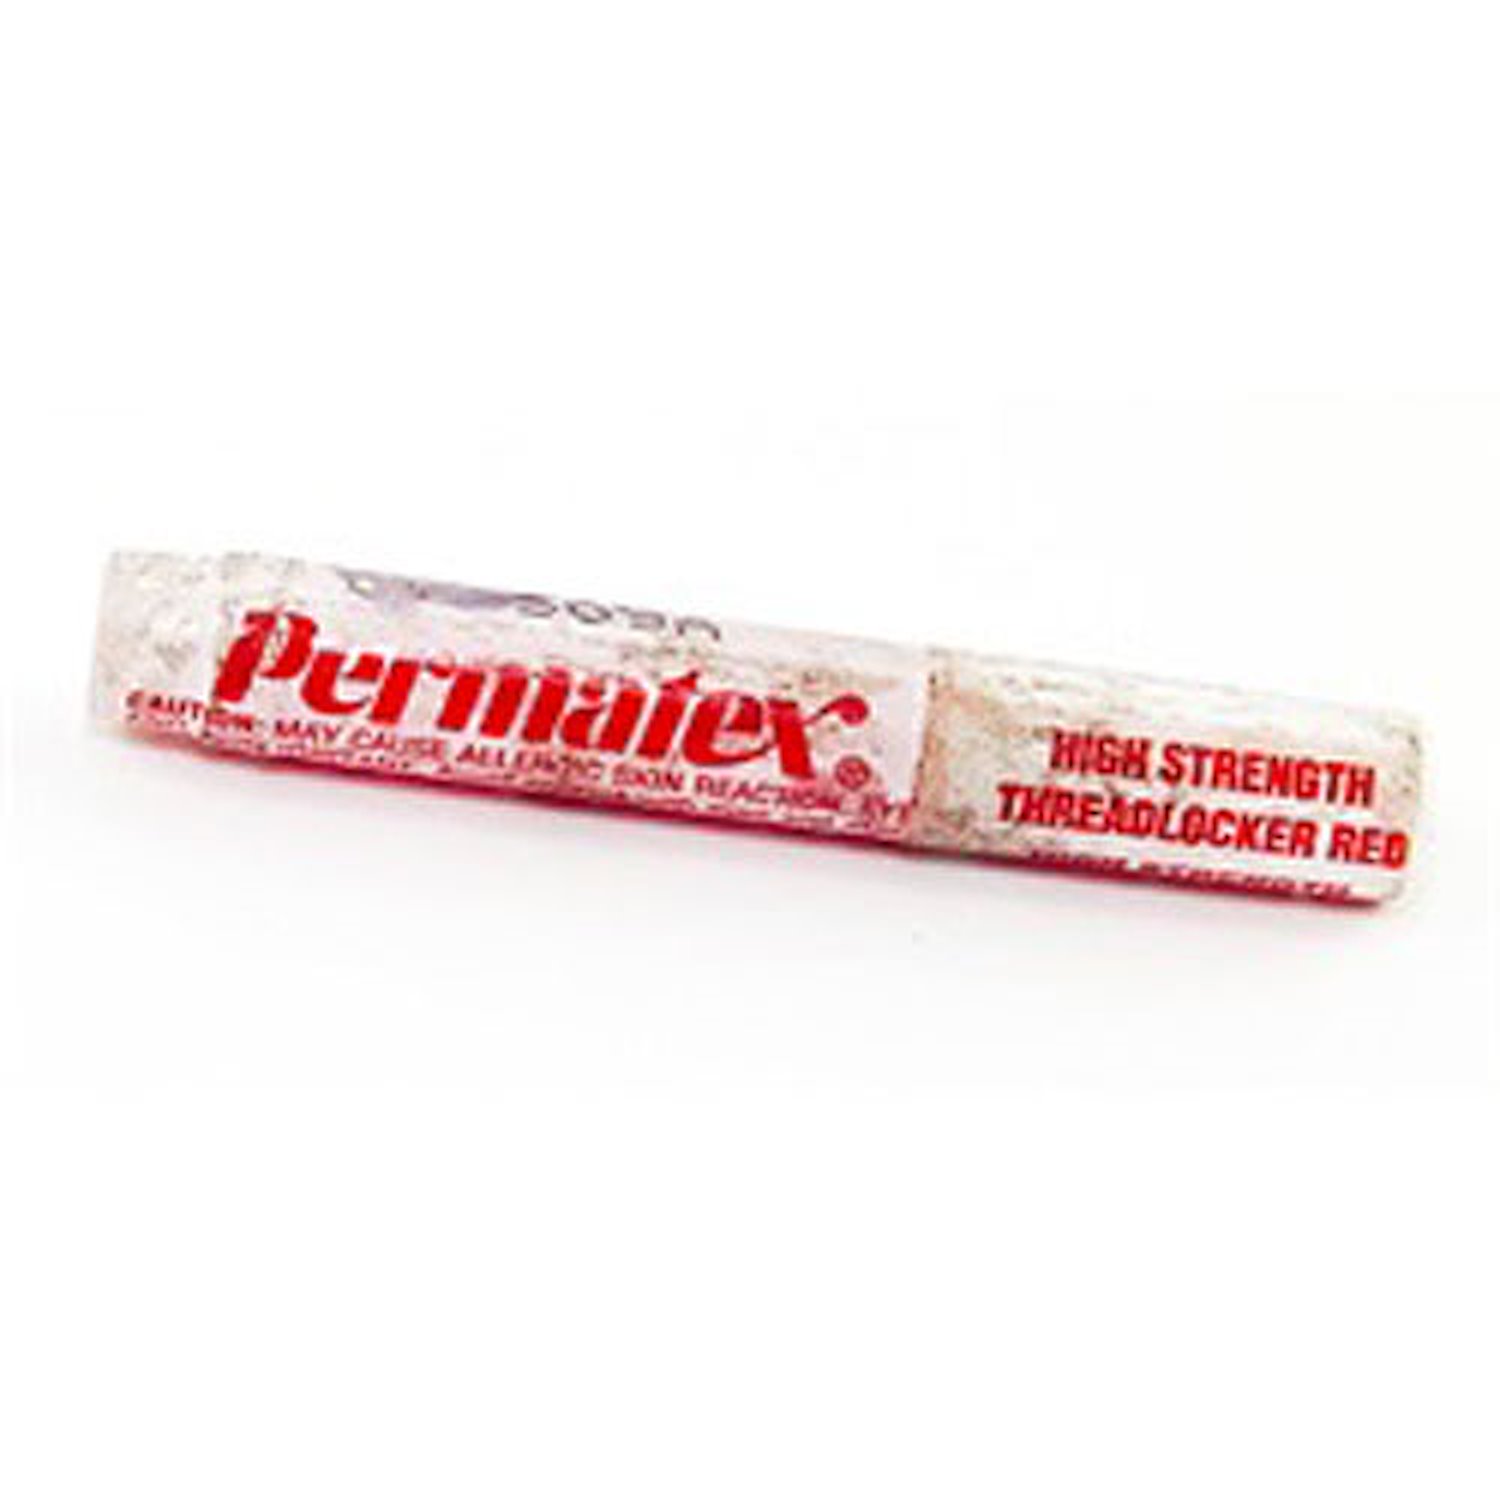 This high-strength red threadlocker from Permatex prevents fasteners from loosening. 5 ml.